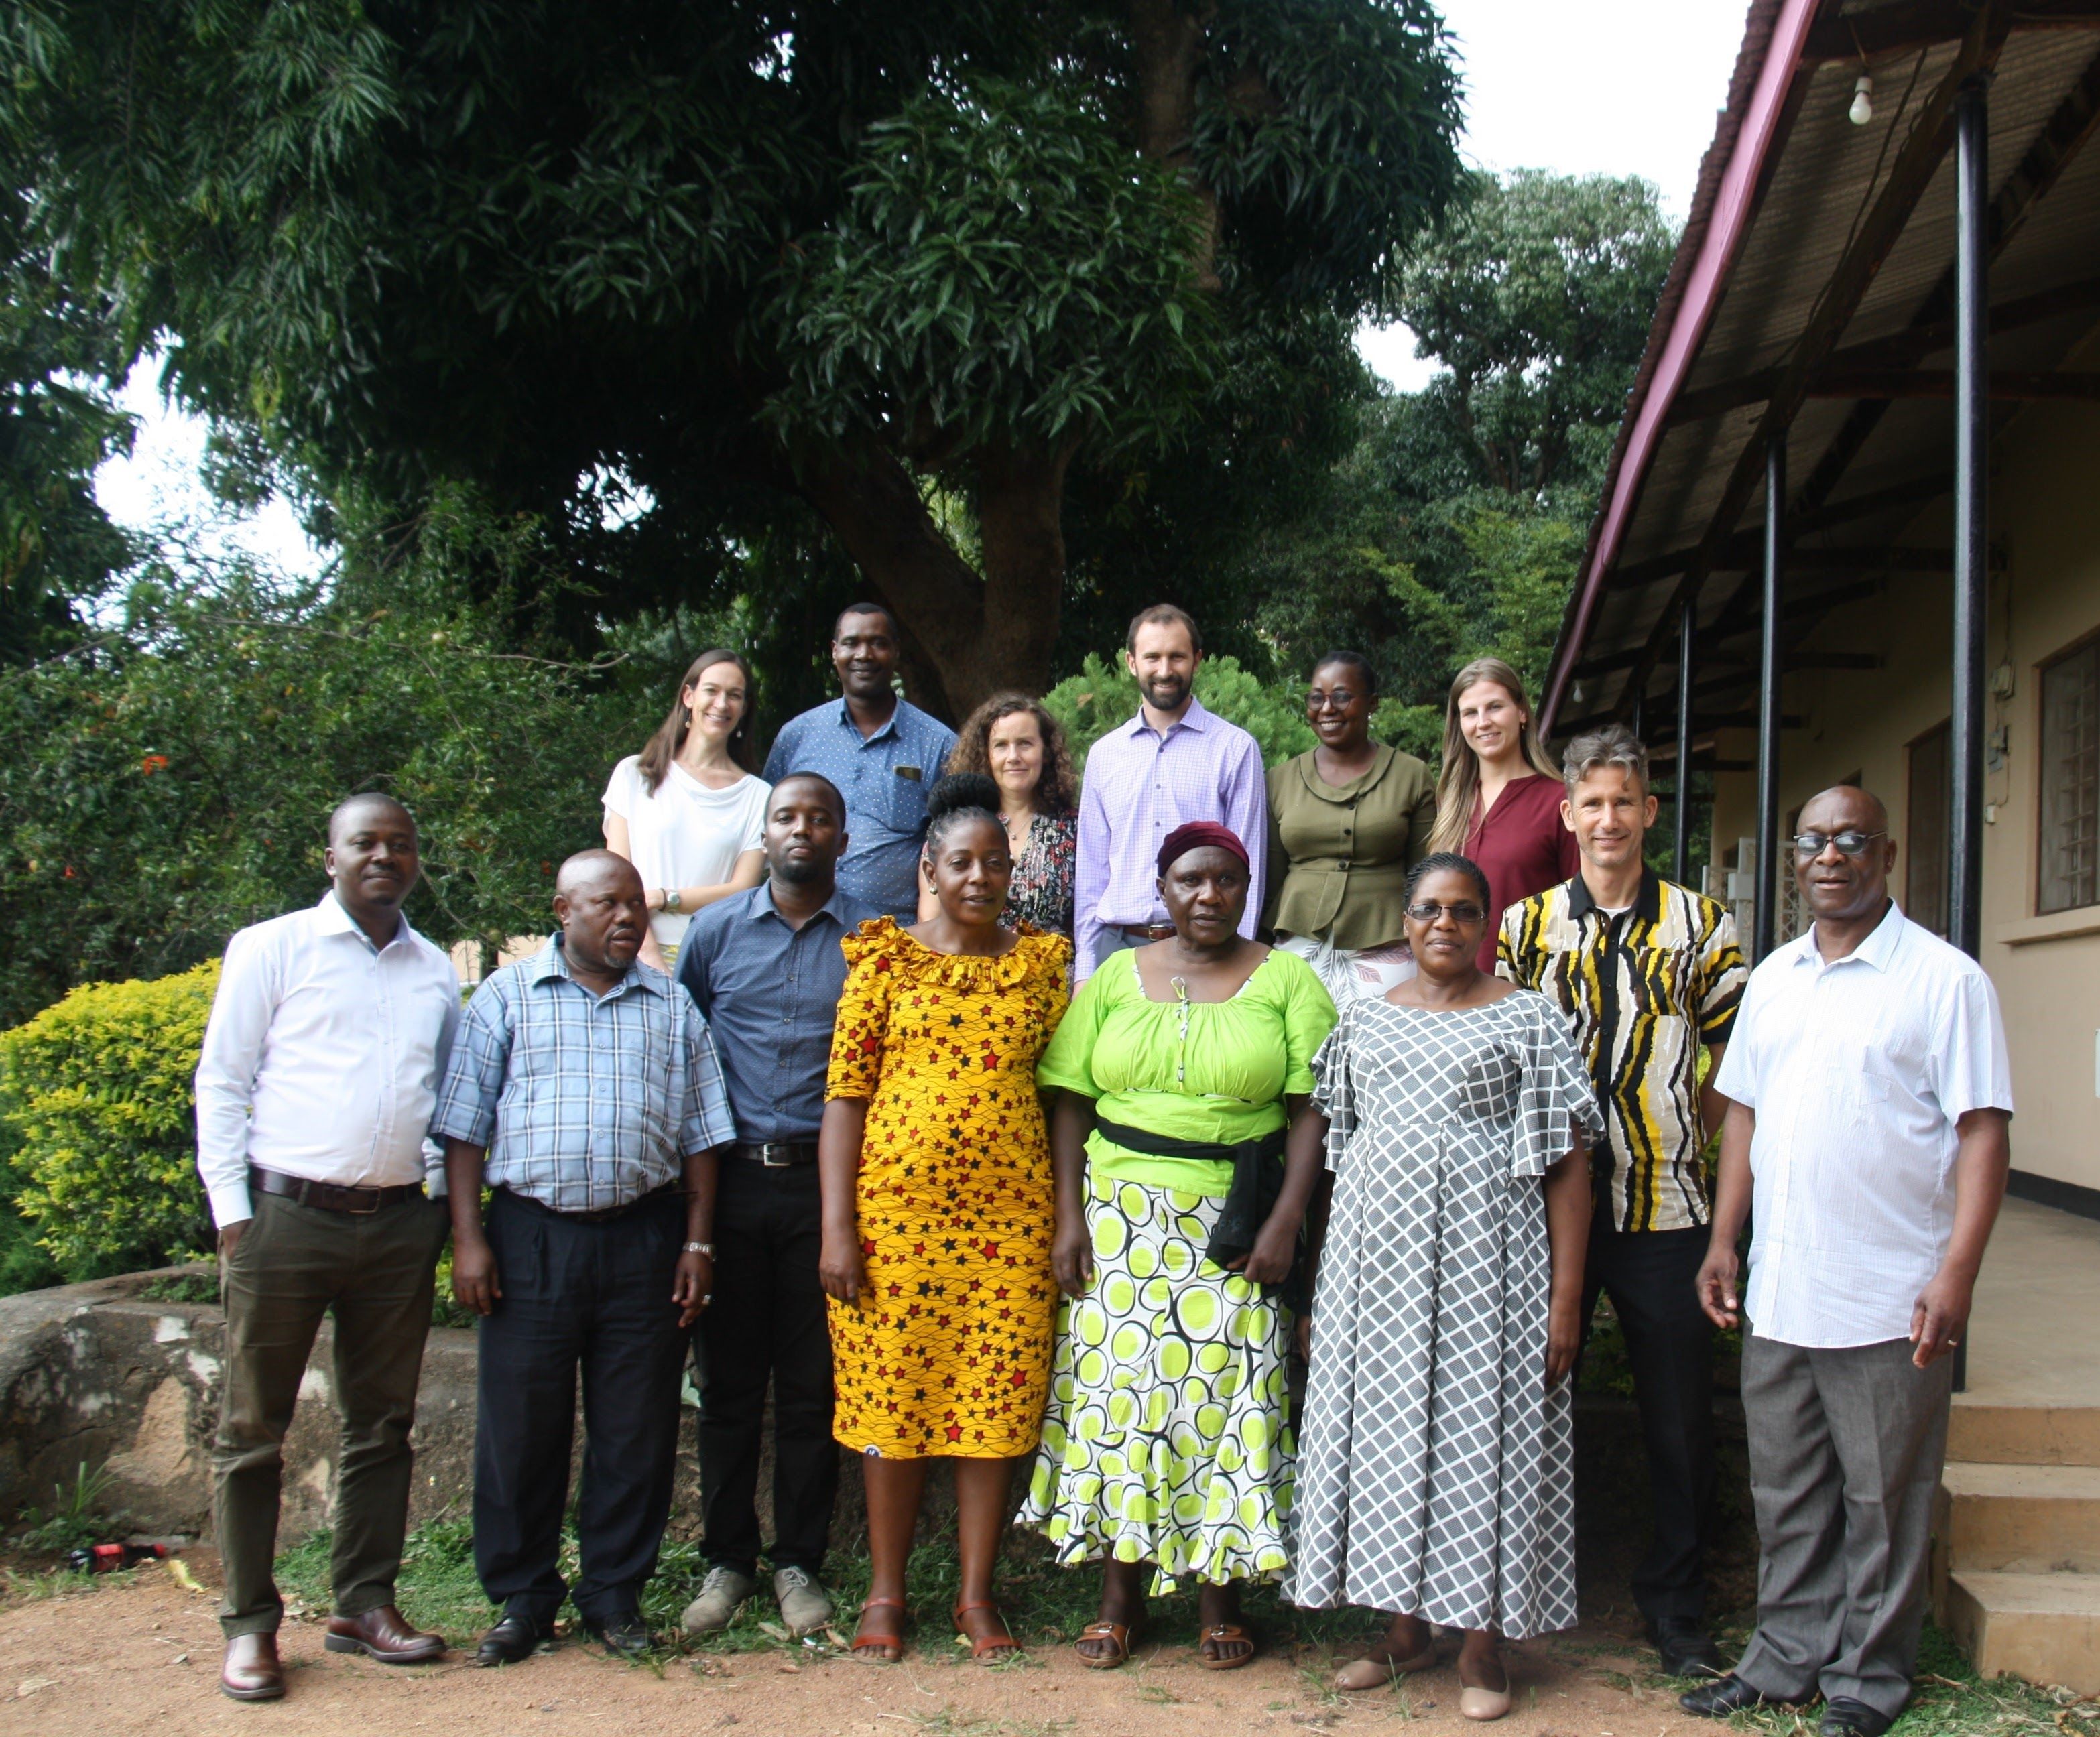 All participants in February’s blood pressure training, including investigators and religious leaders, at Mwanza Christian College.